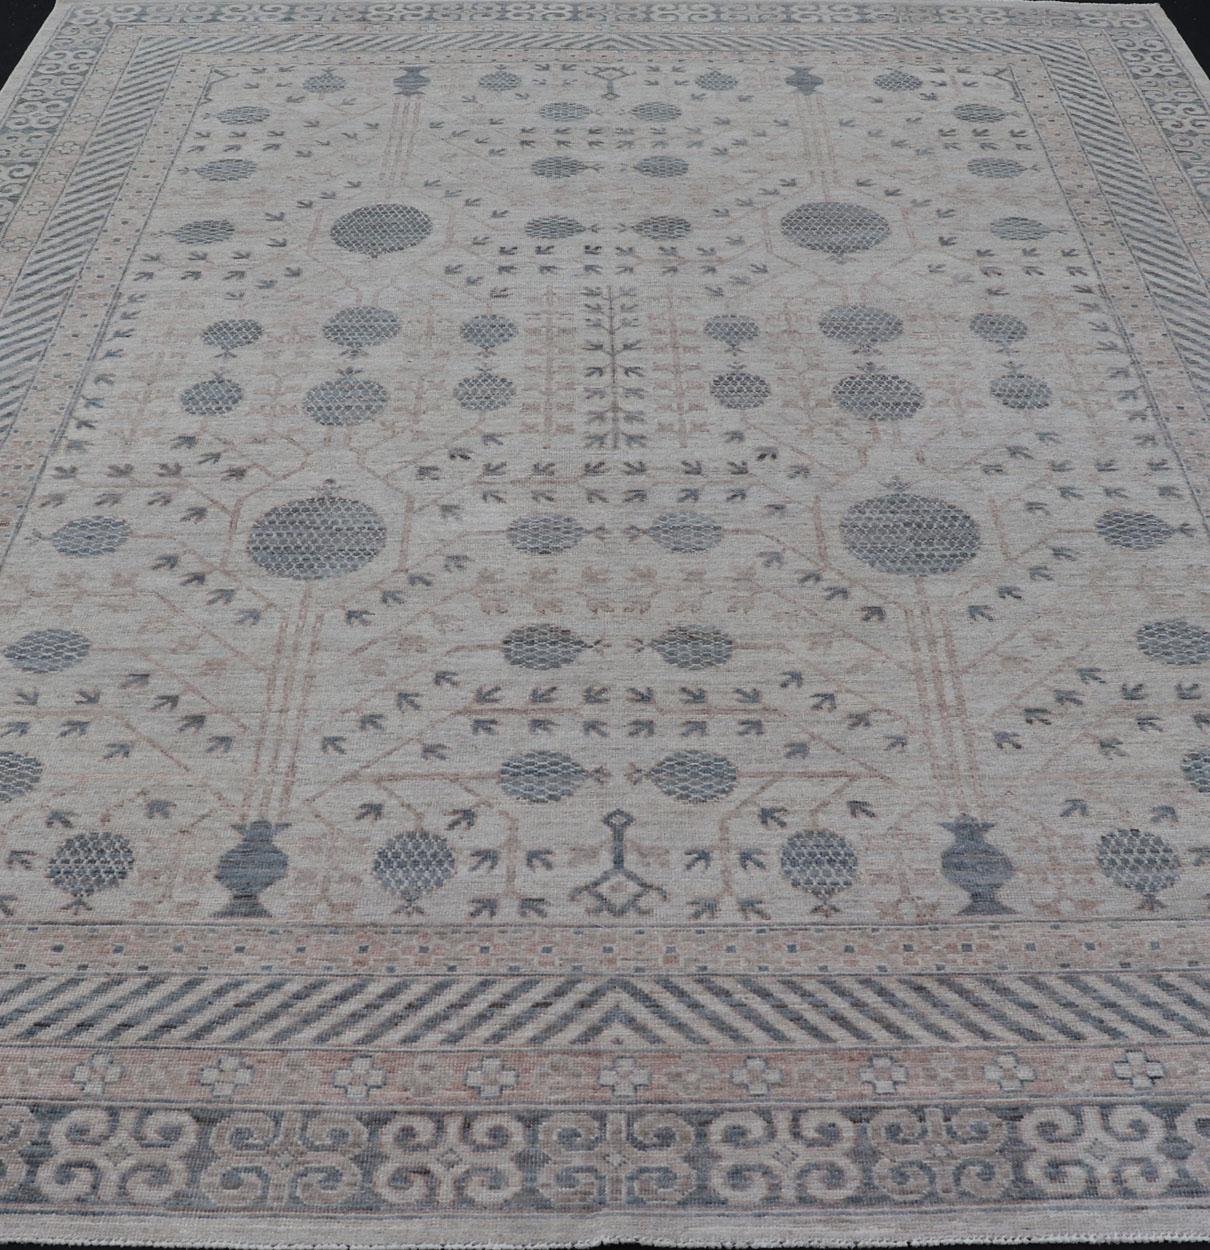 Modern Tribal Khotan Rug in Shades of Cream, Tan, and Light Teal For Sale 6